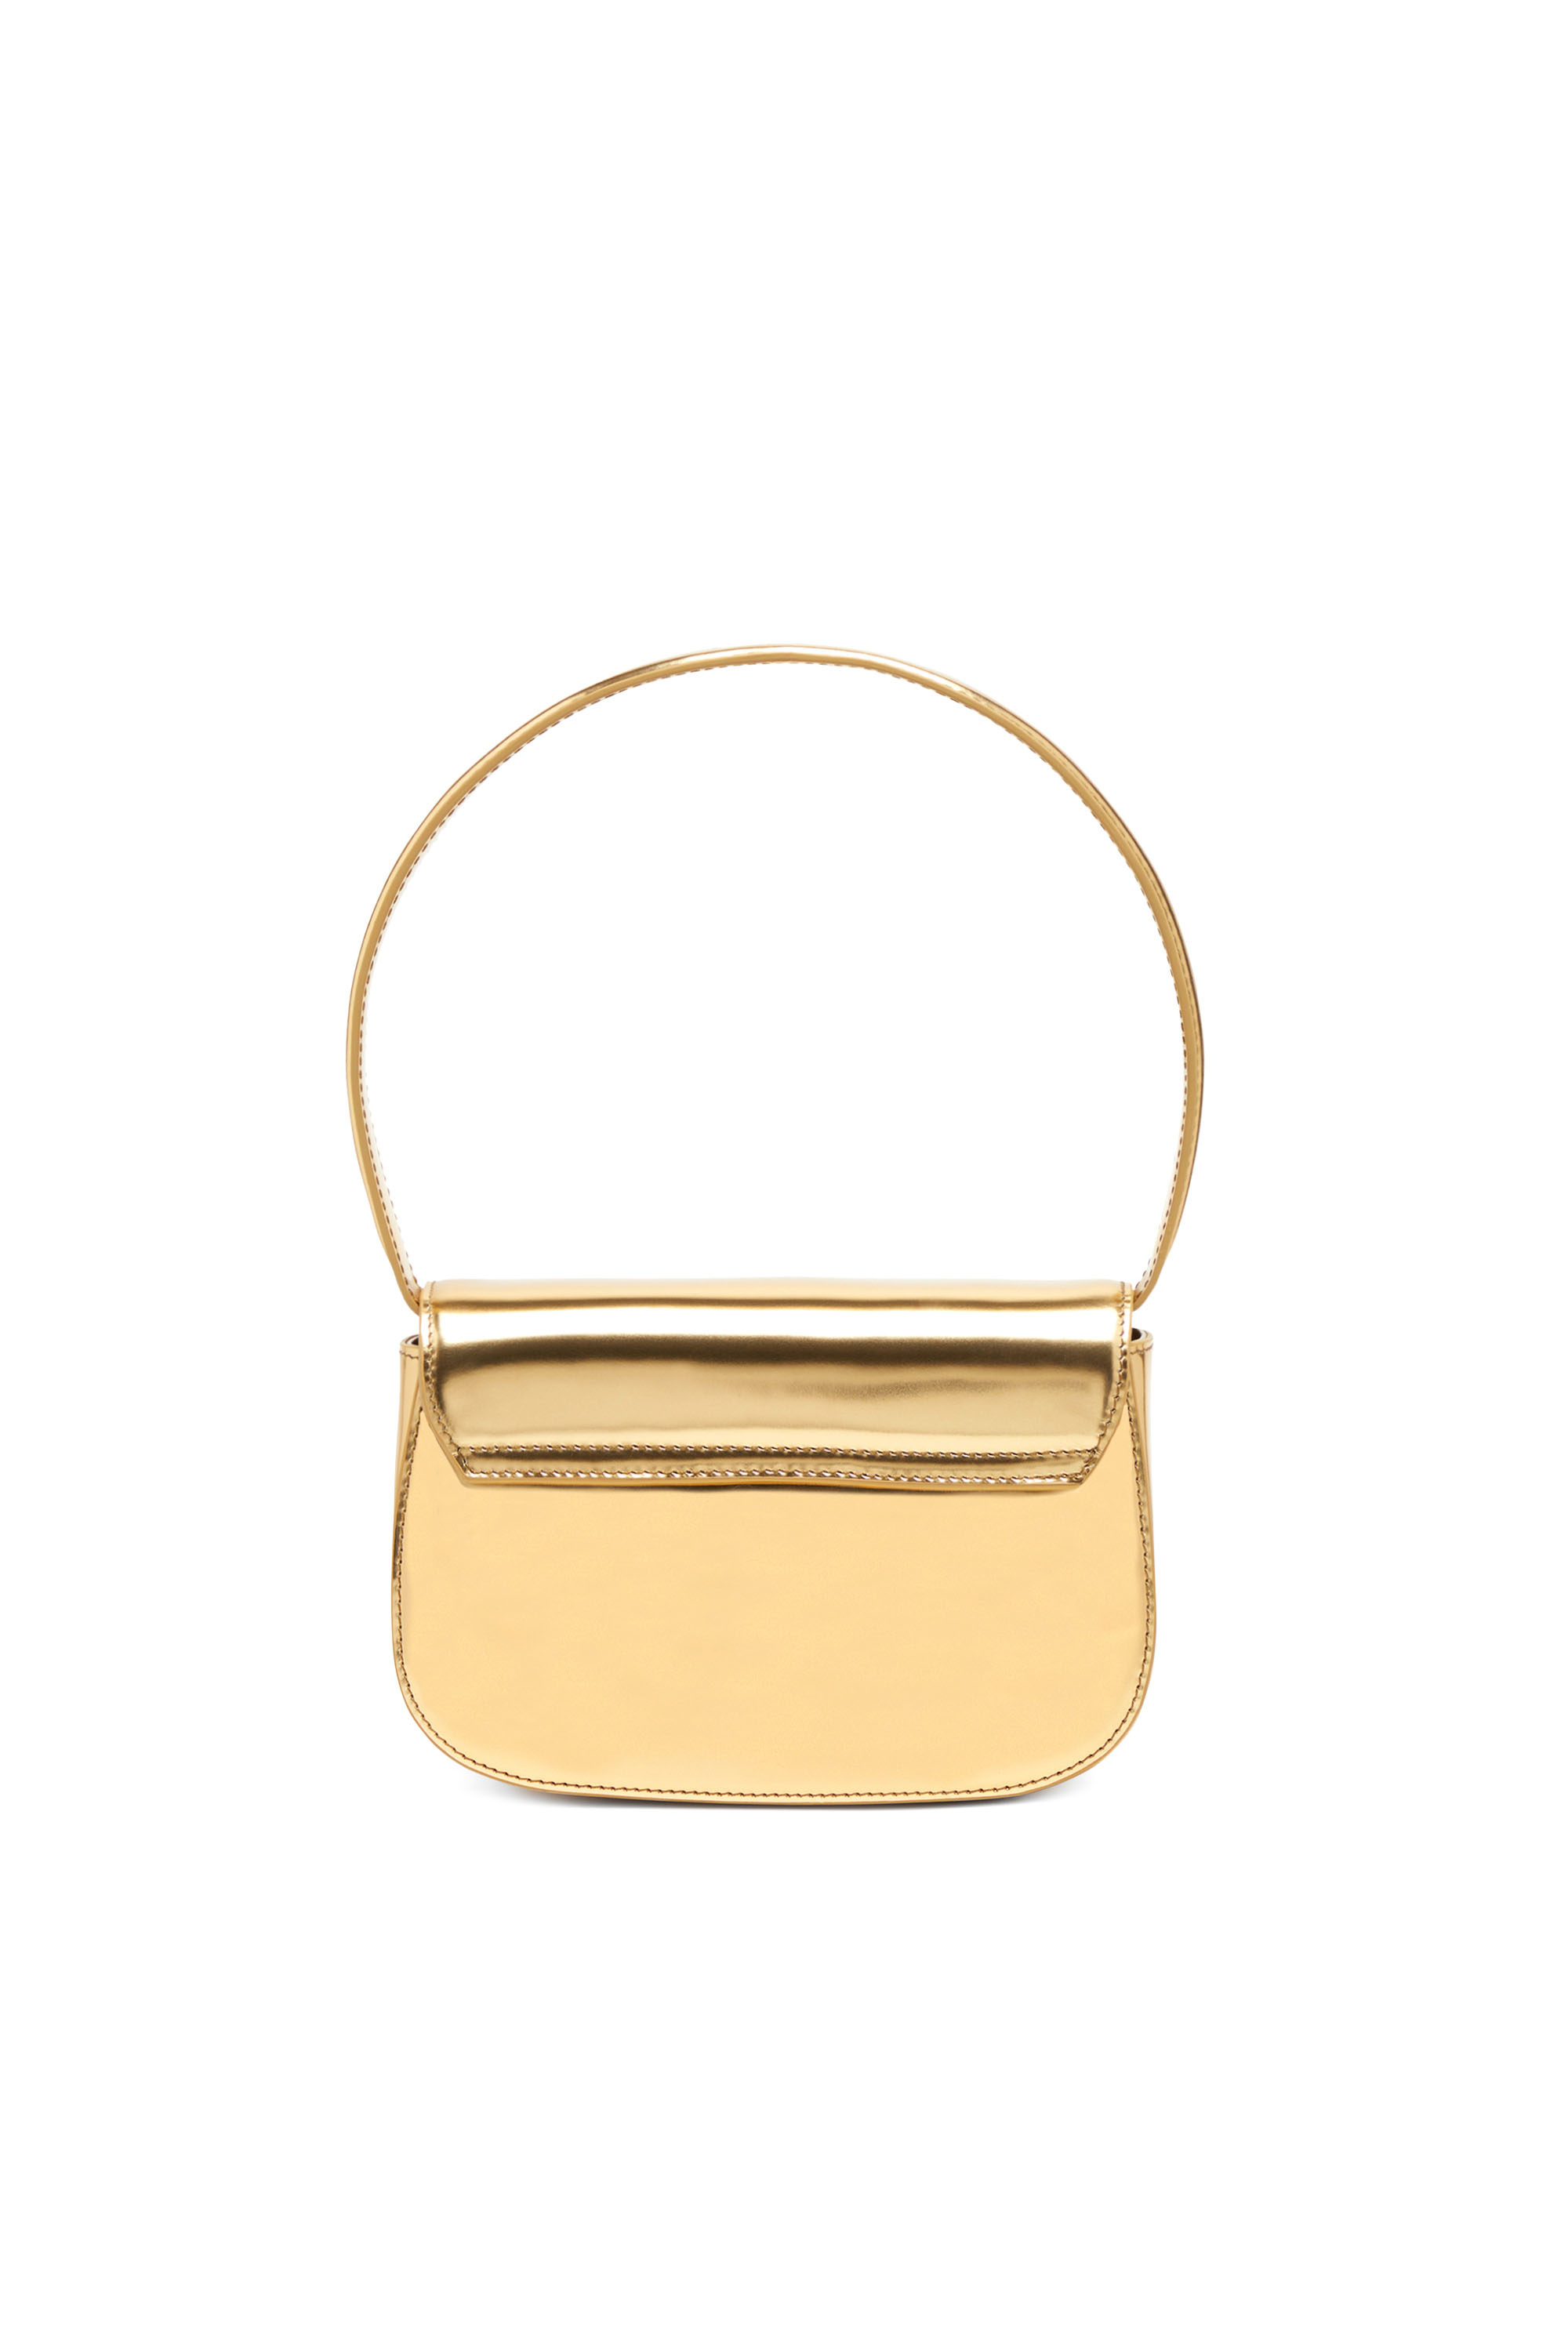 Diesel - 1DR, Woman 1DR-Iconic shoulder bag in mirrored leather in Oro - Image 2